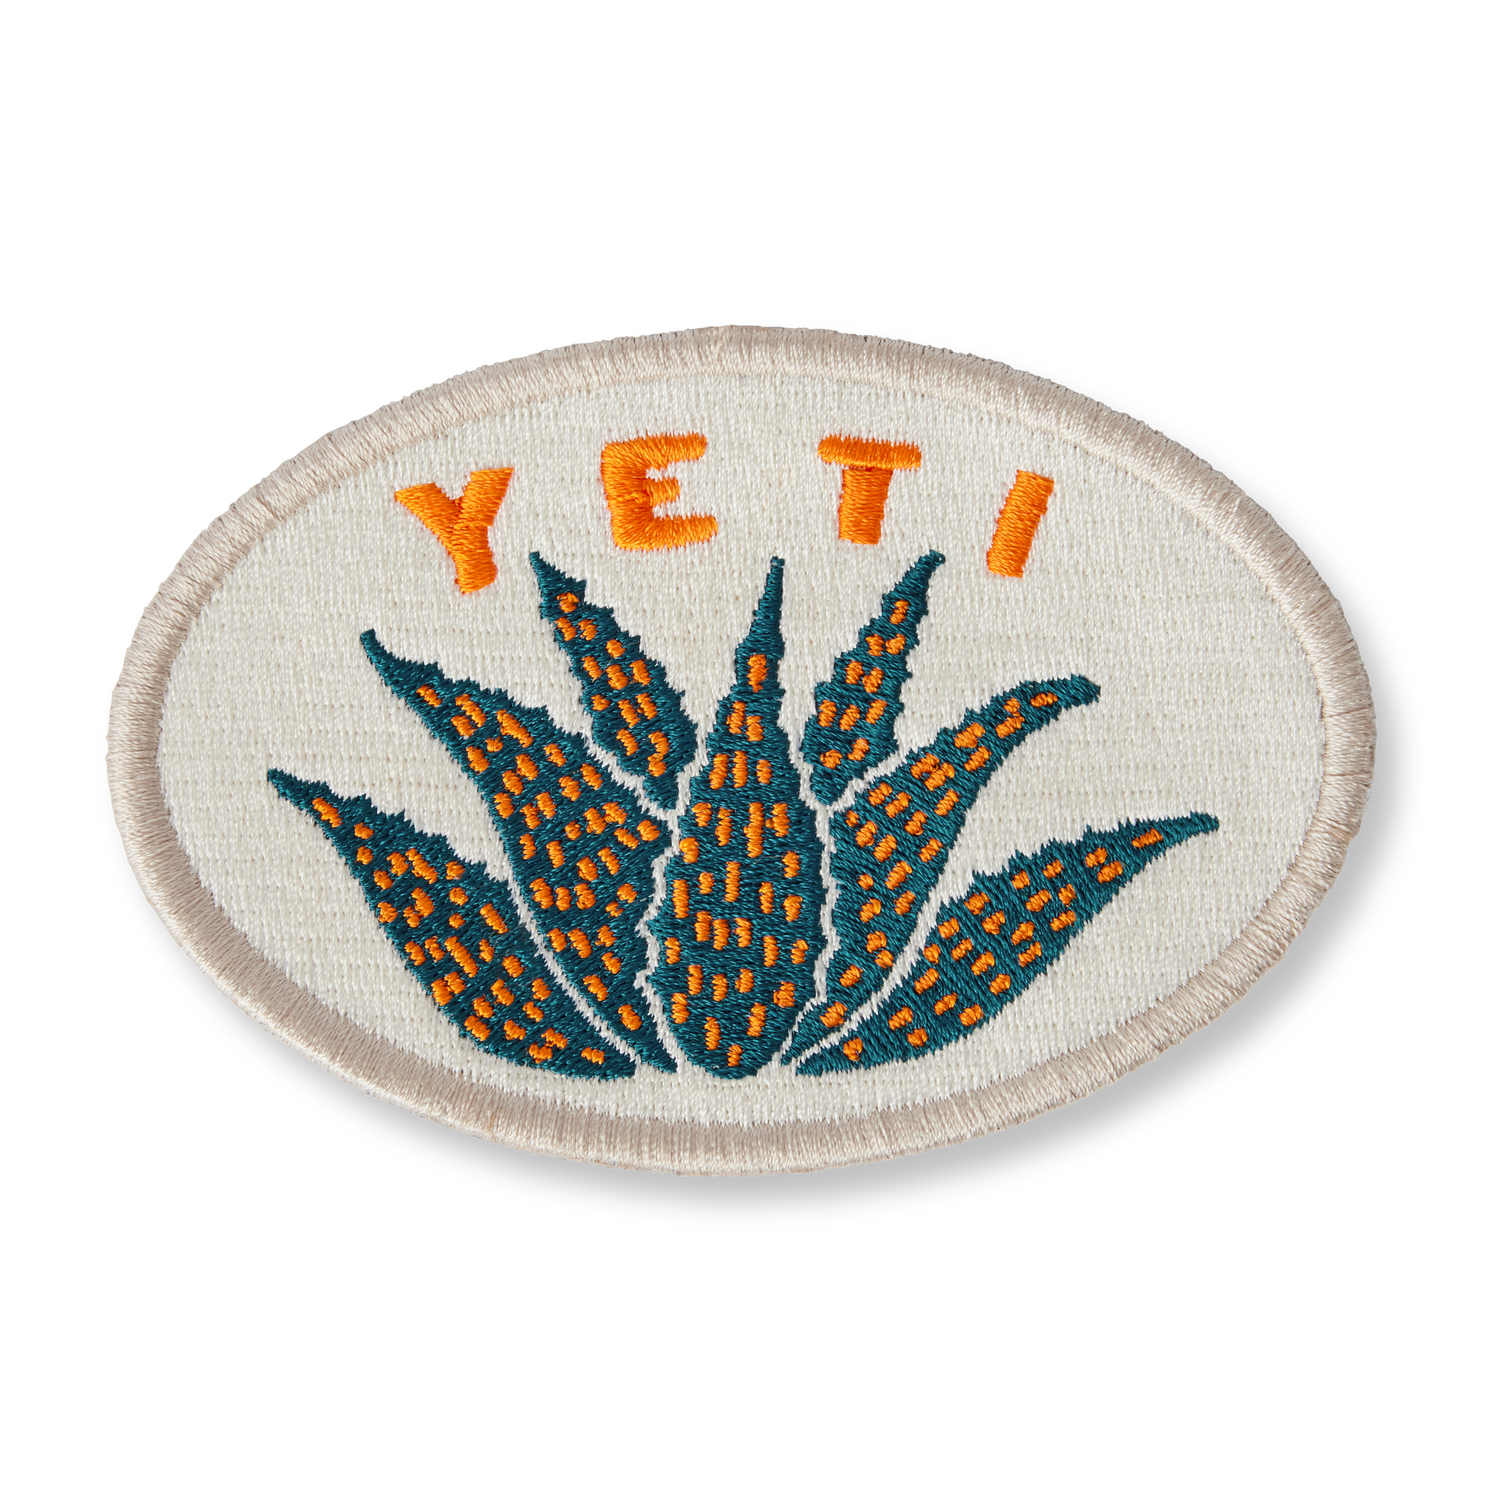 YETI Collectors Patches Agave Teal